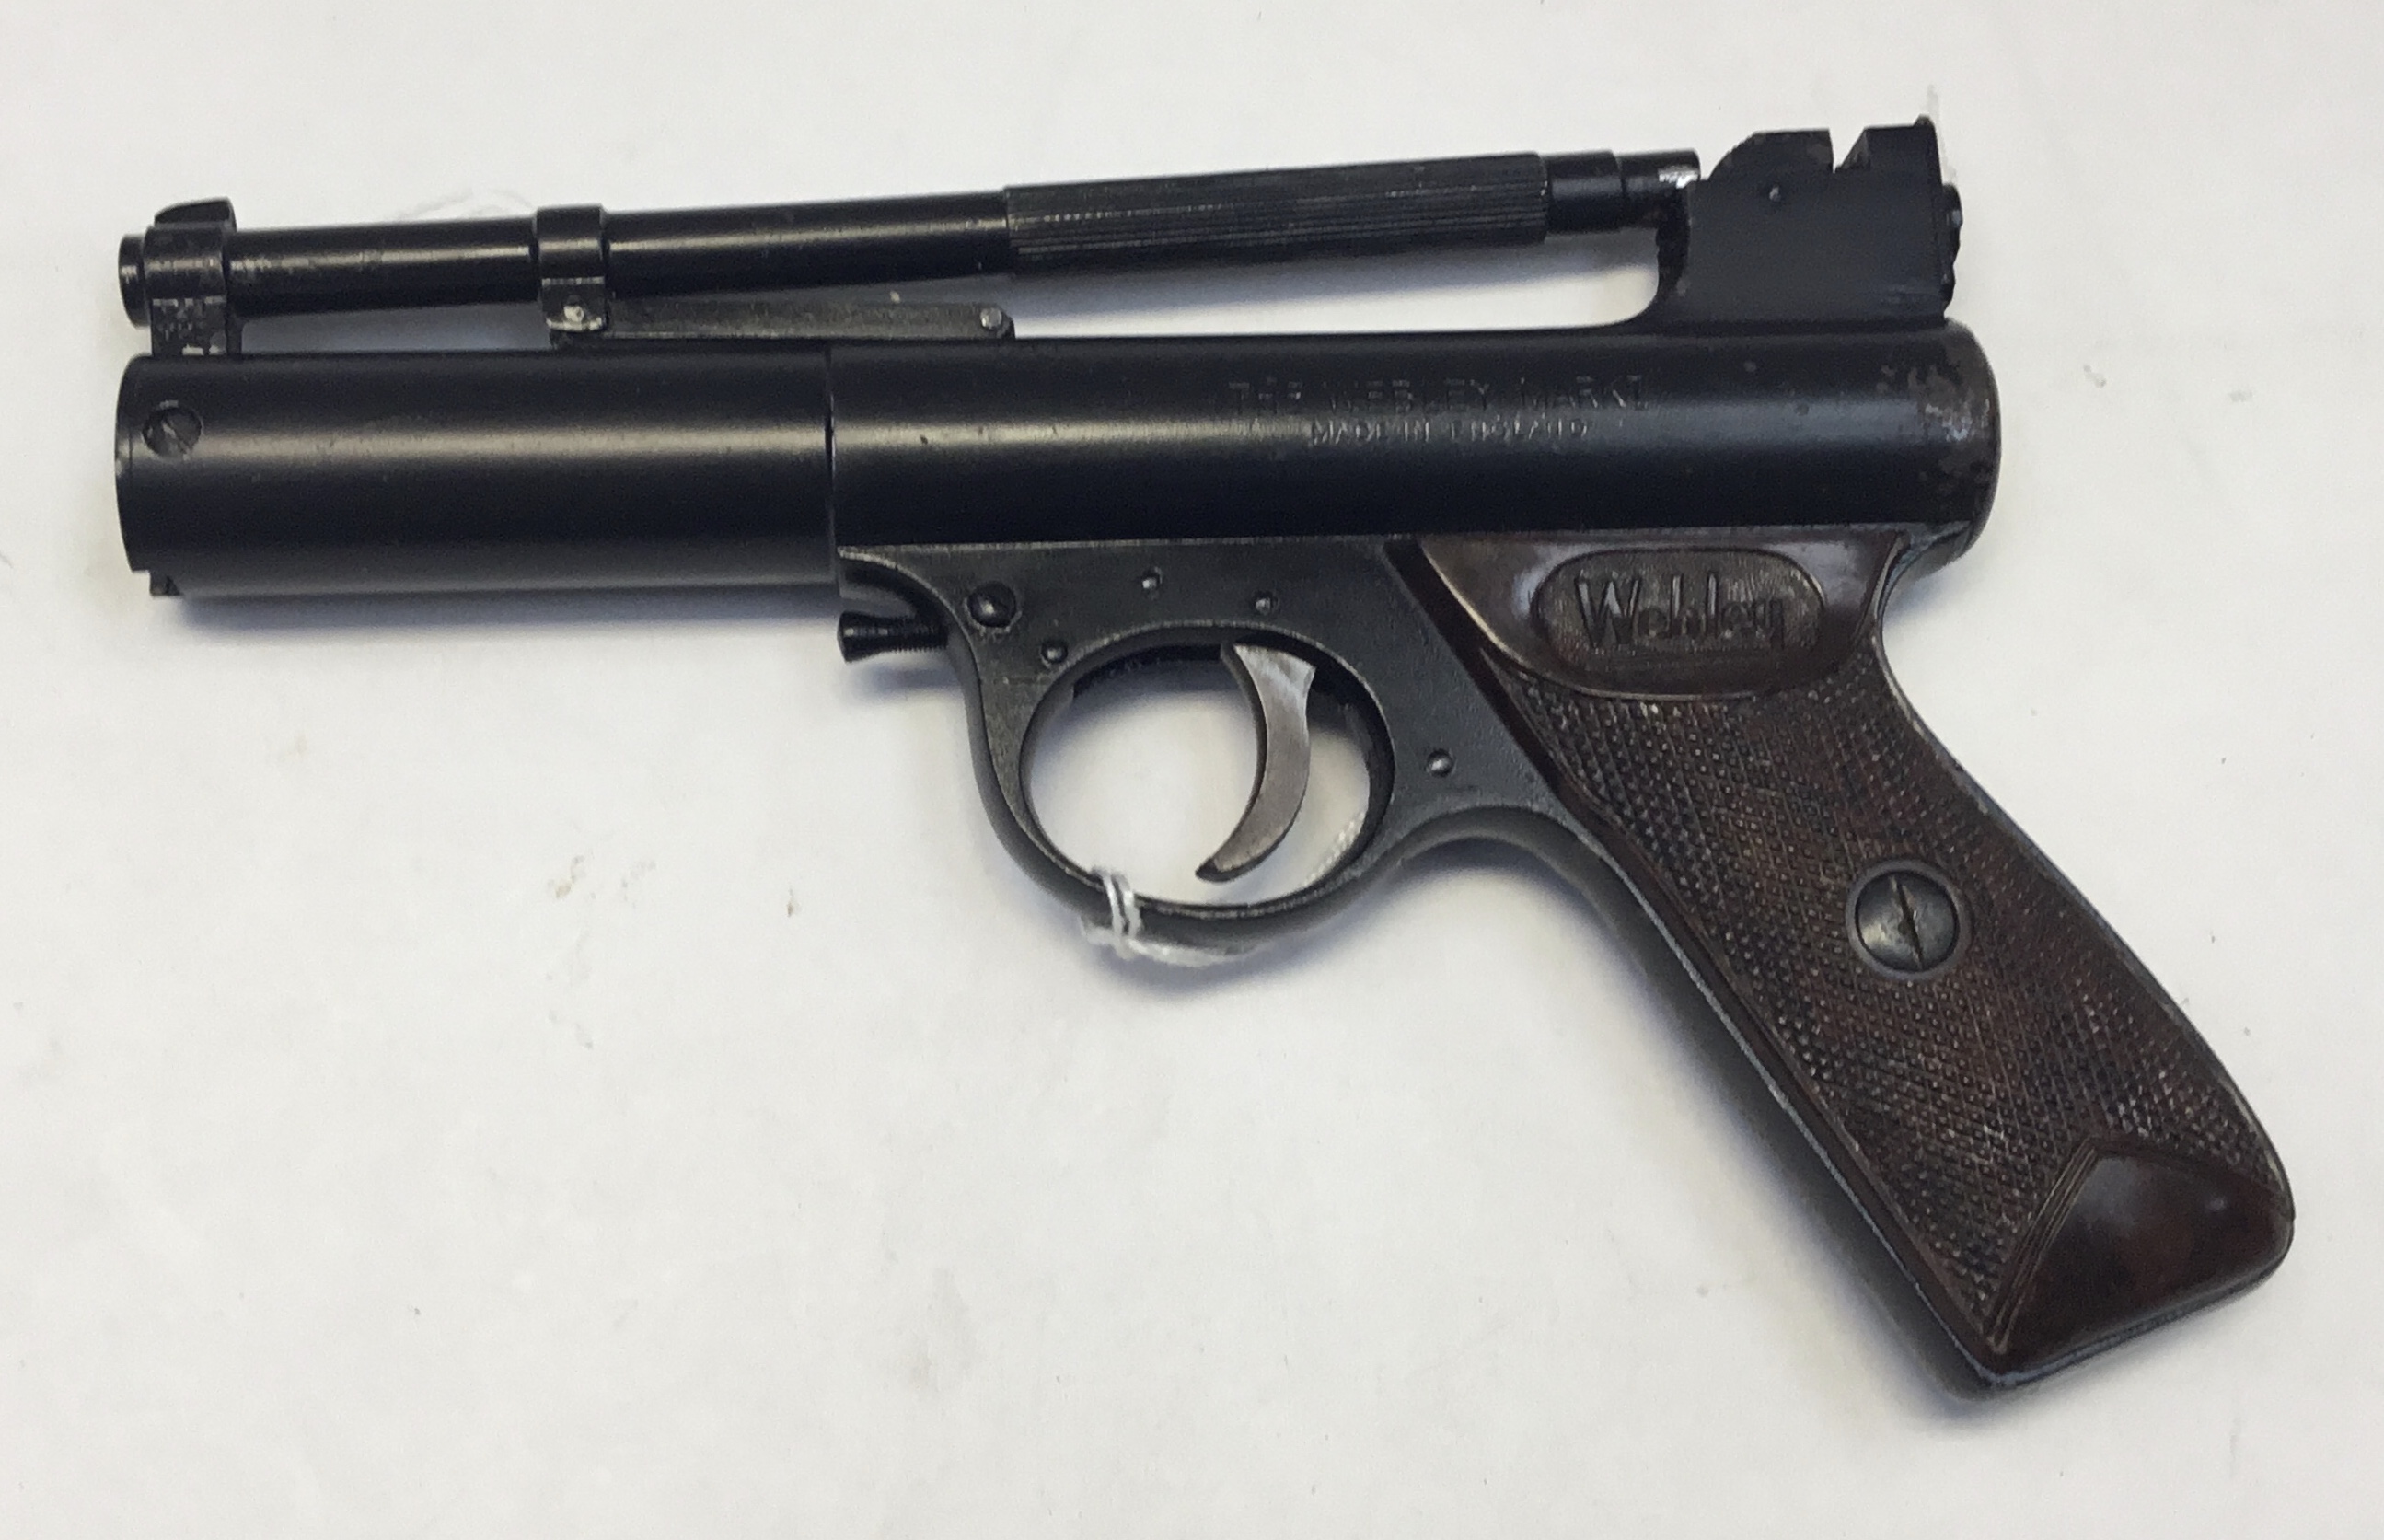 Webley Mk 1 over-lever air pistol in .22 with rifled barrel. A clean example of this popular